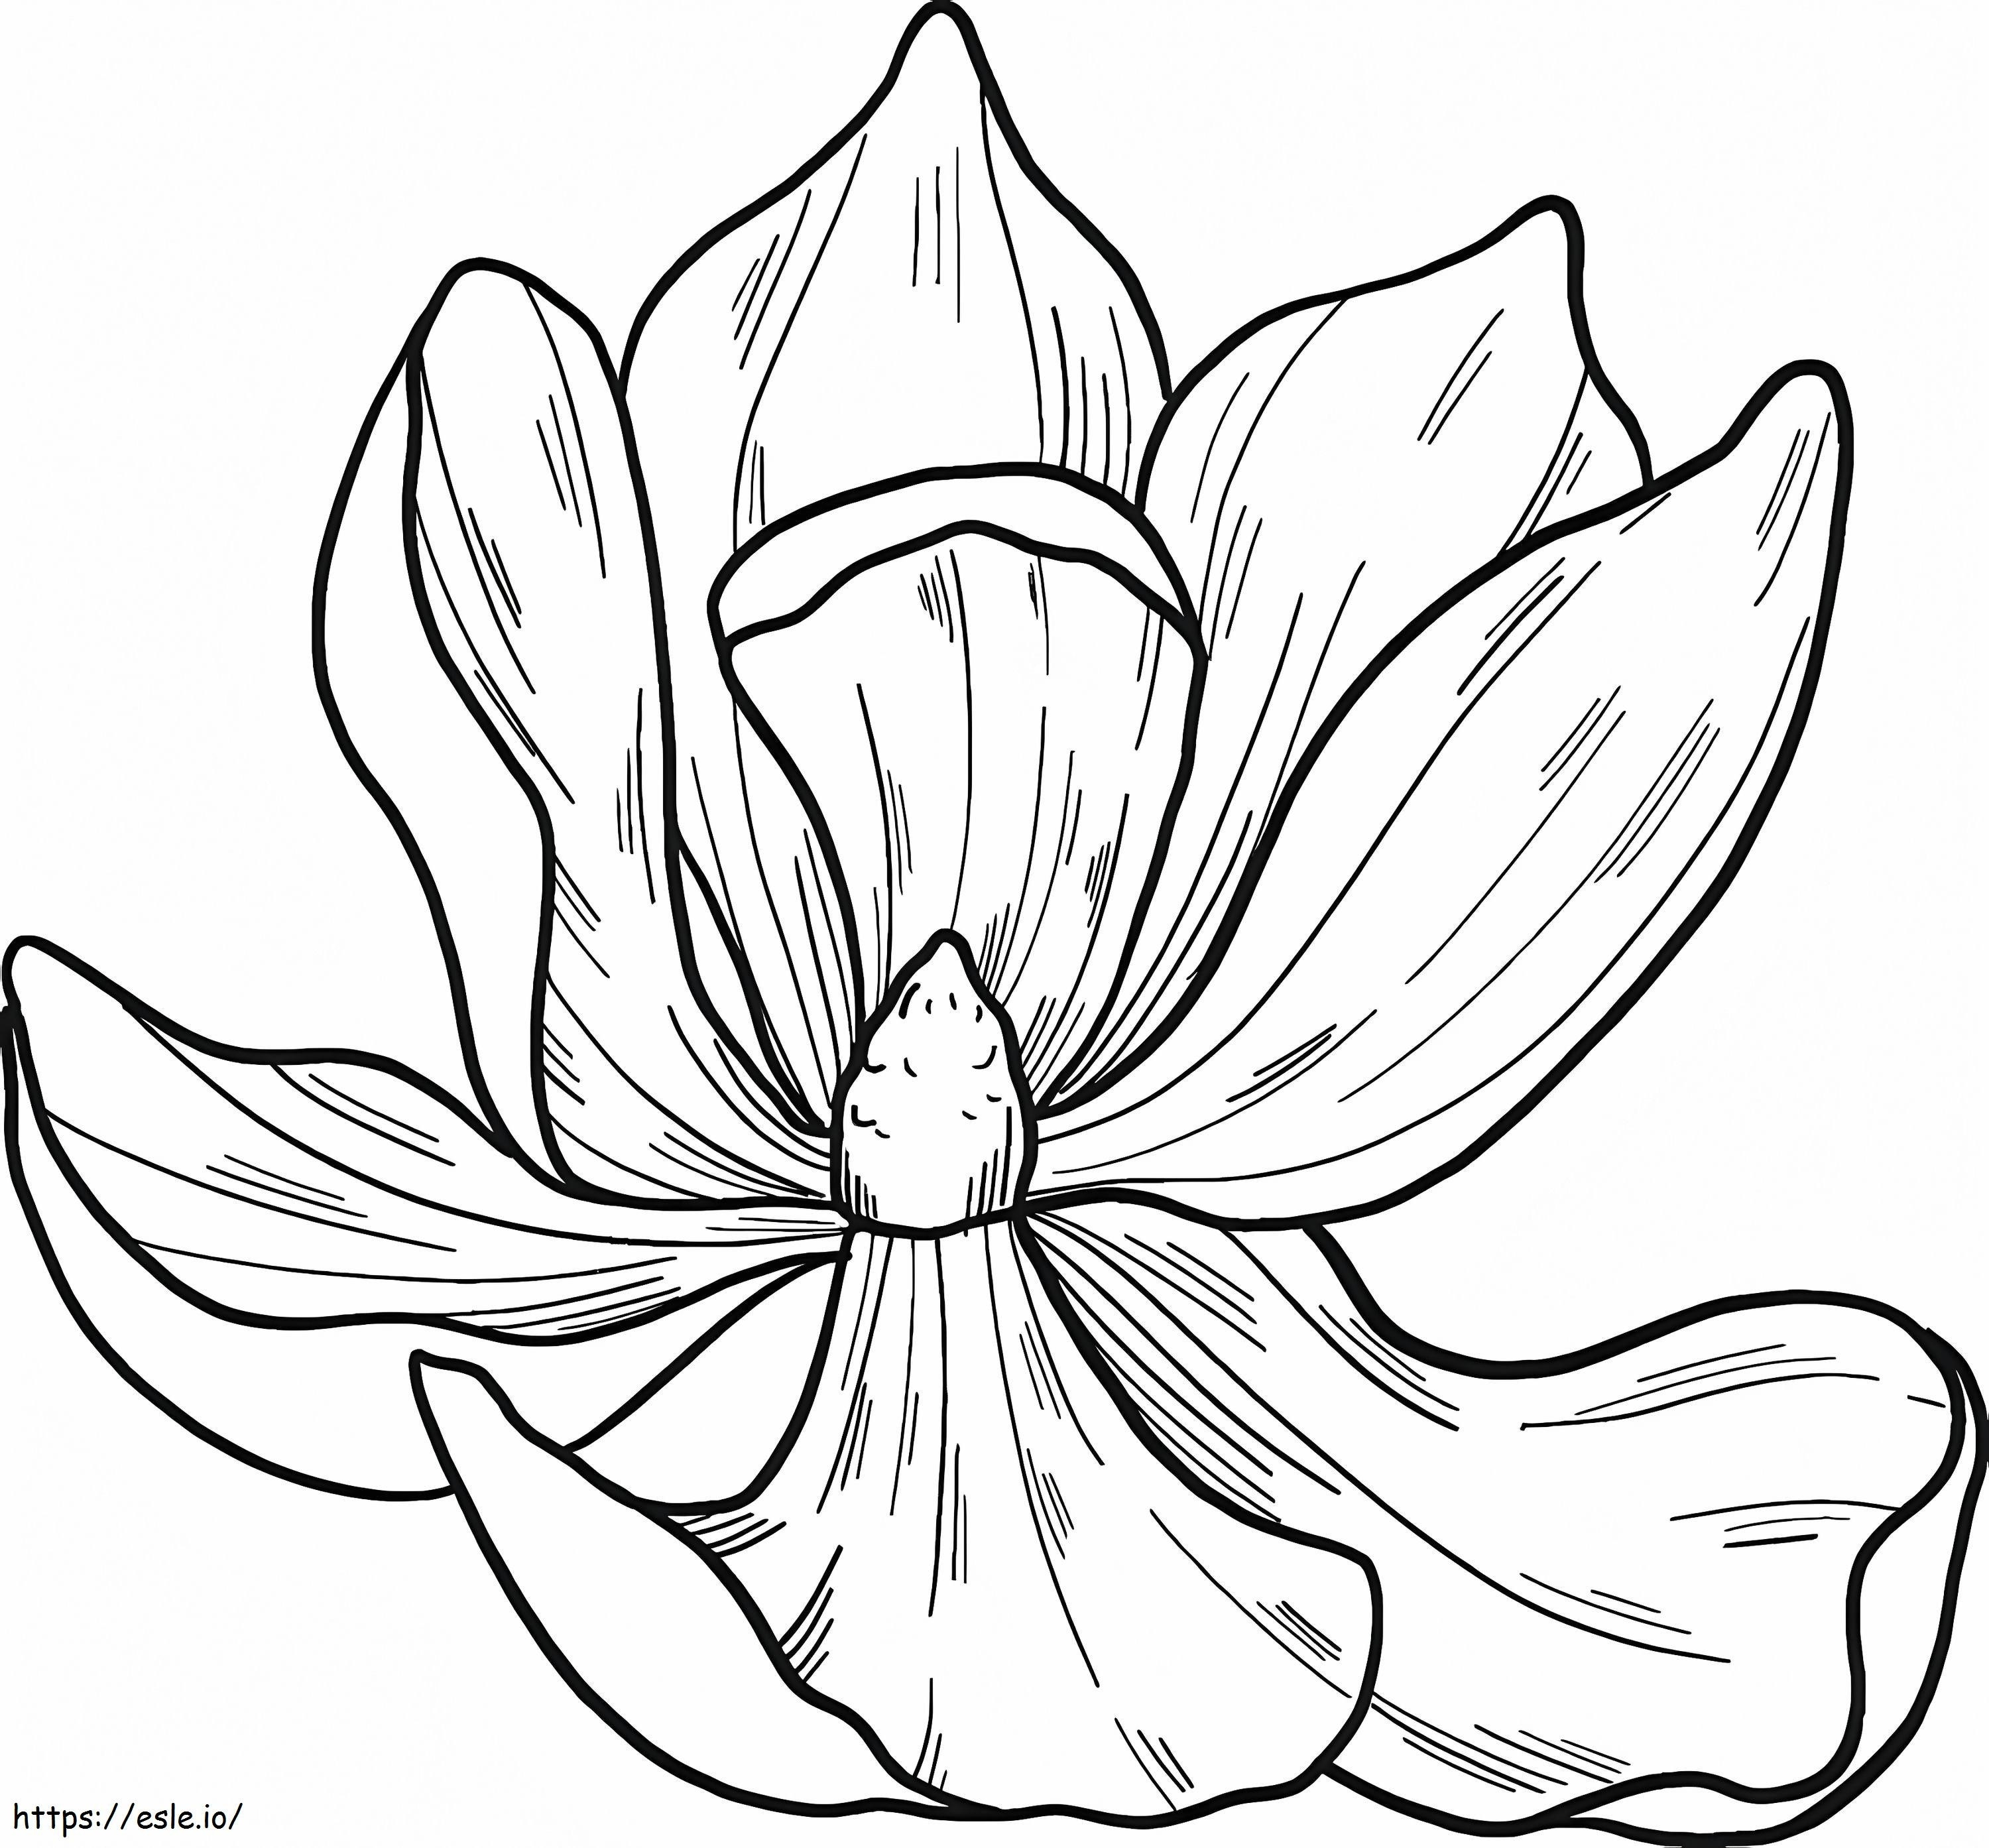 Magnolia Flower 2 coloring page